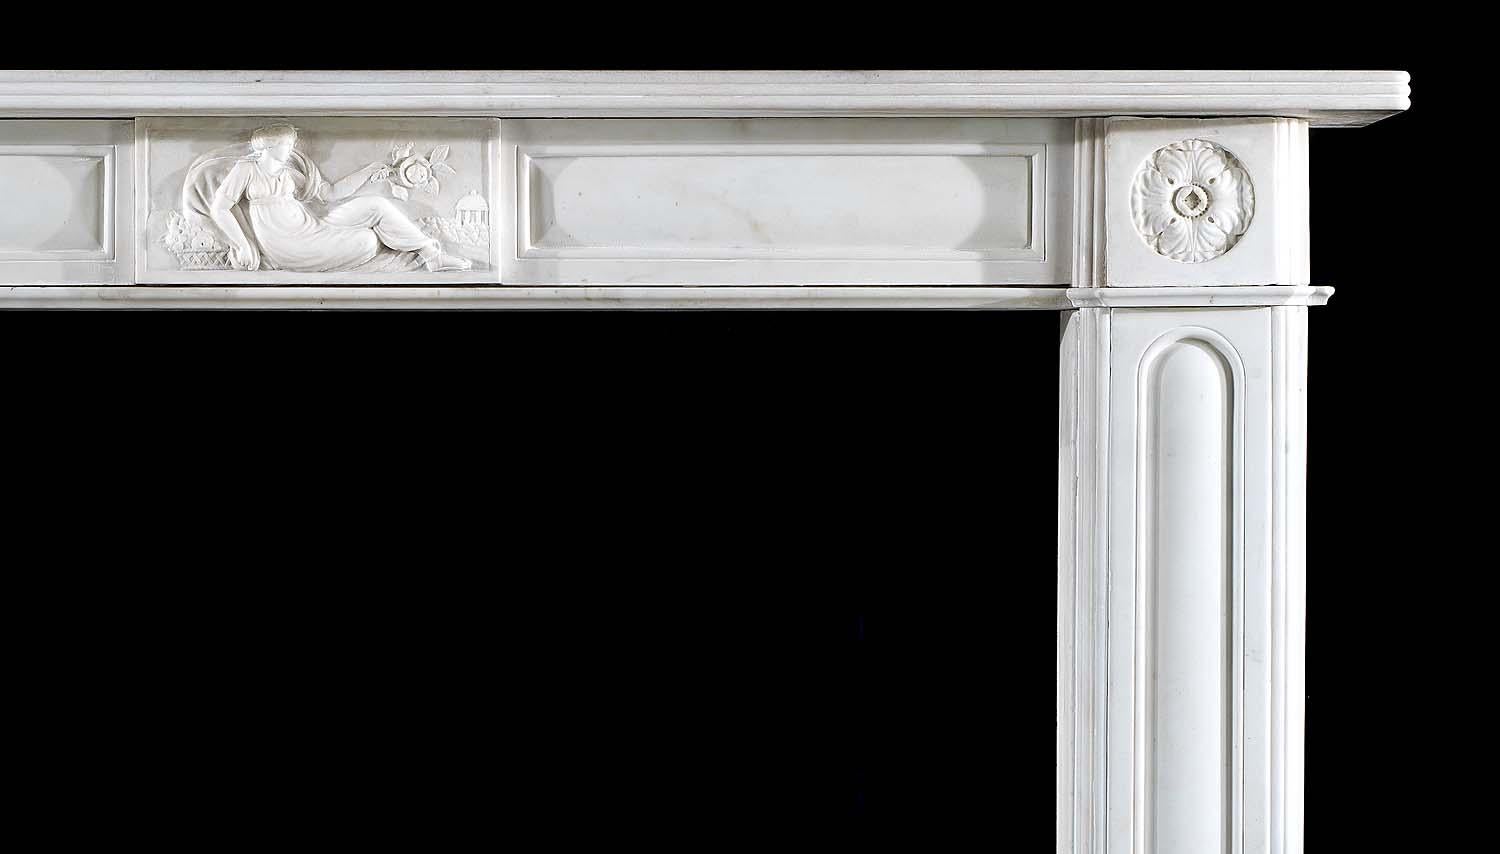 A fine Regency fireplace surround in pure white statuary marble. Beautifully elegant in its simplicity. The twin cushioned panelled frieze, beneath the moulded shelf, is centred by a tablet depicting a reclining Venus, holding aloft a rose, beside a